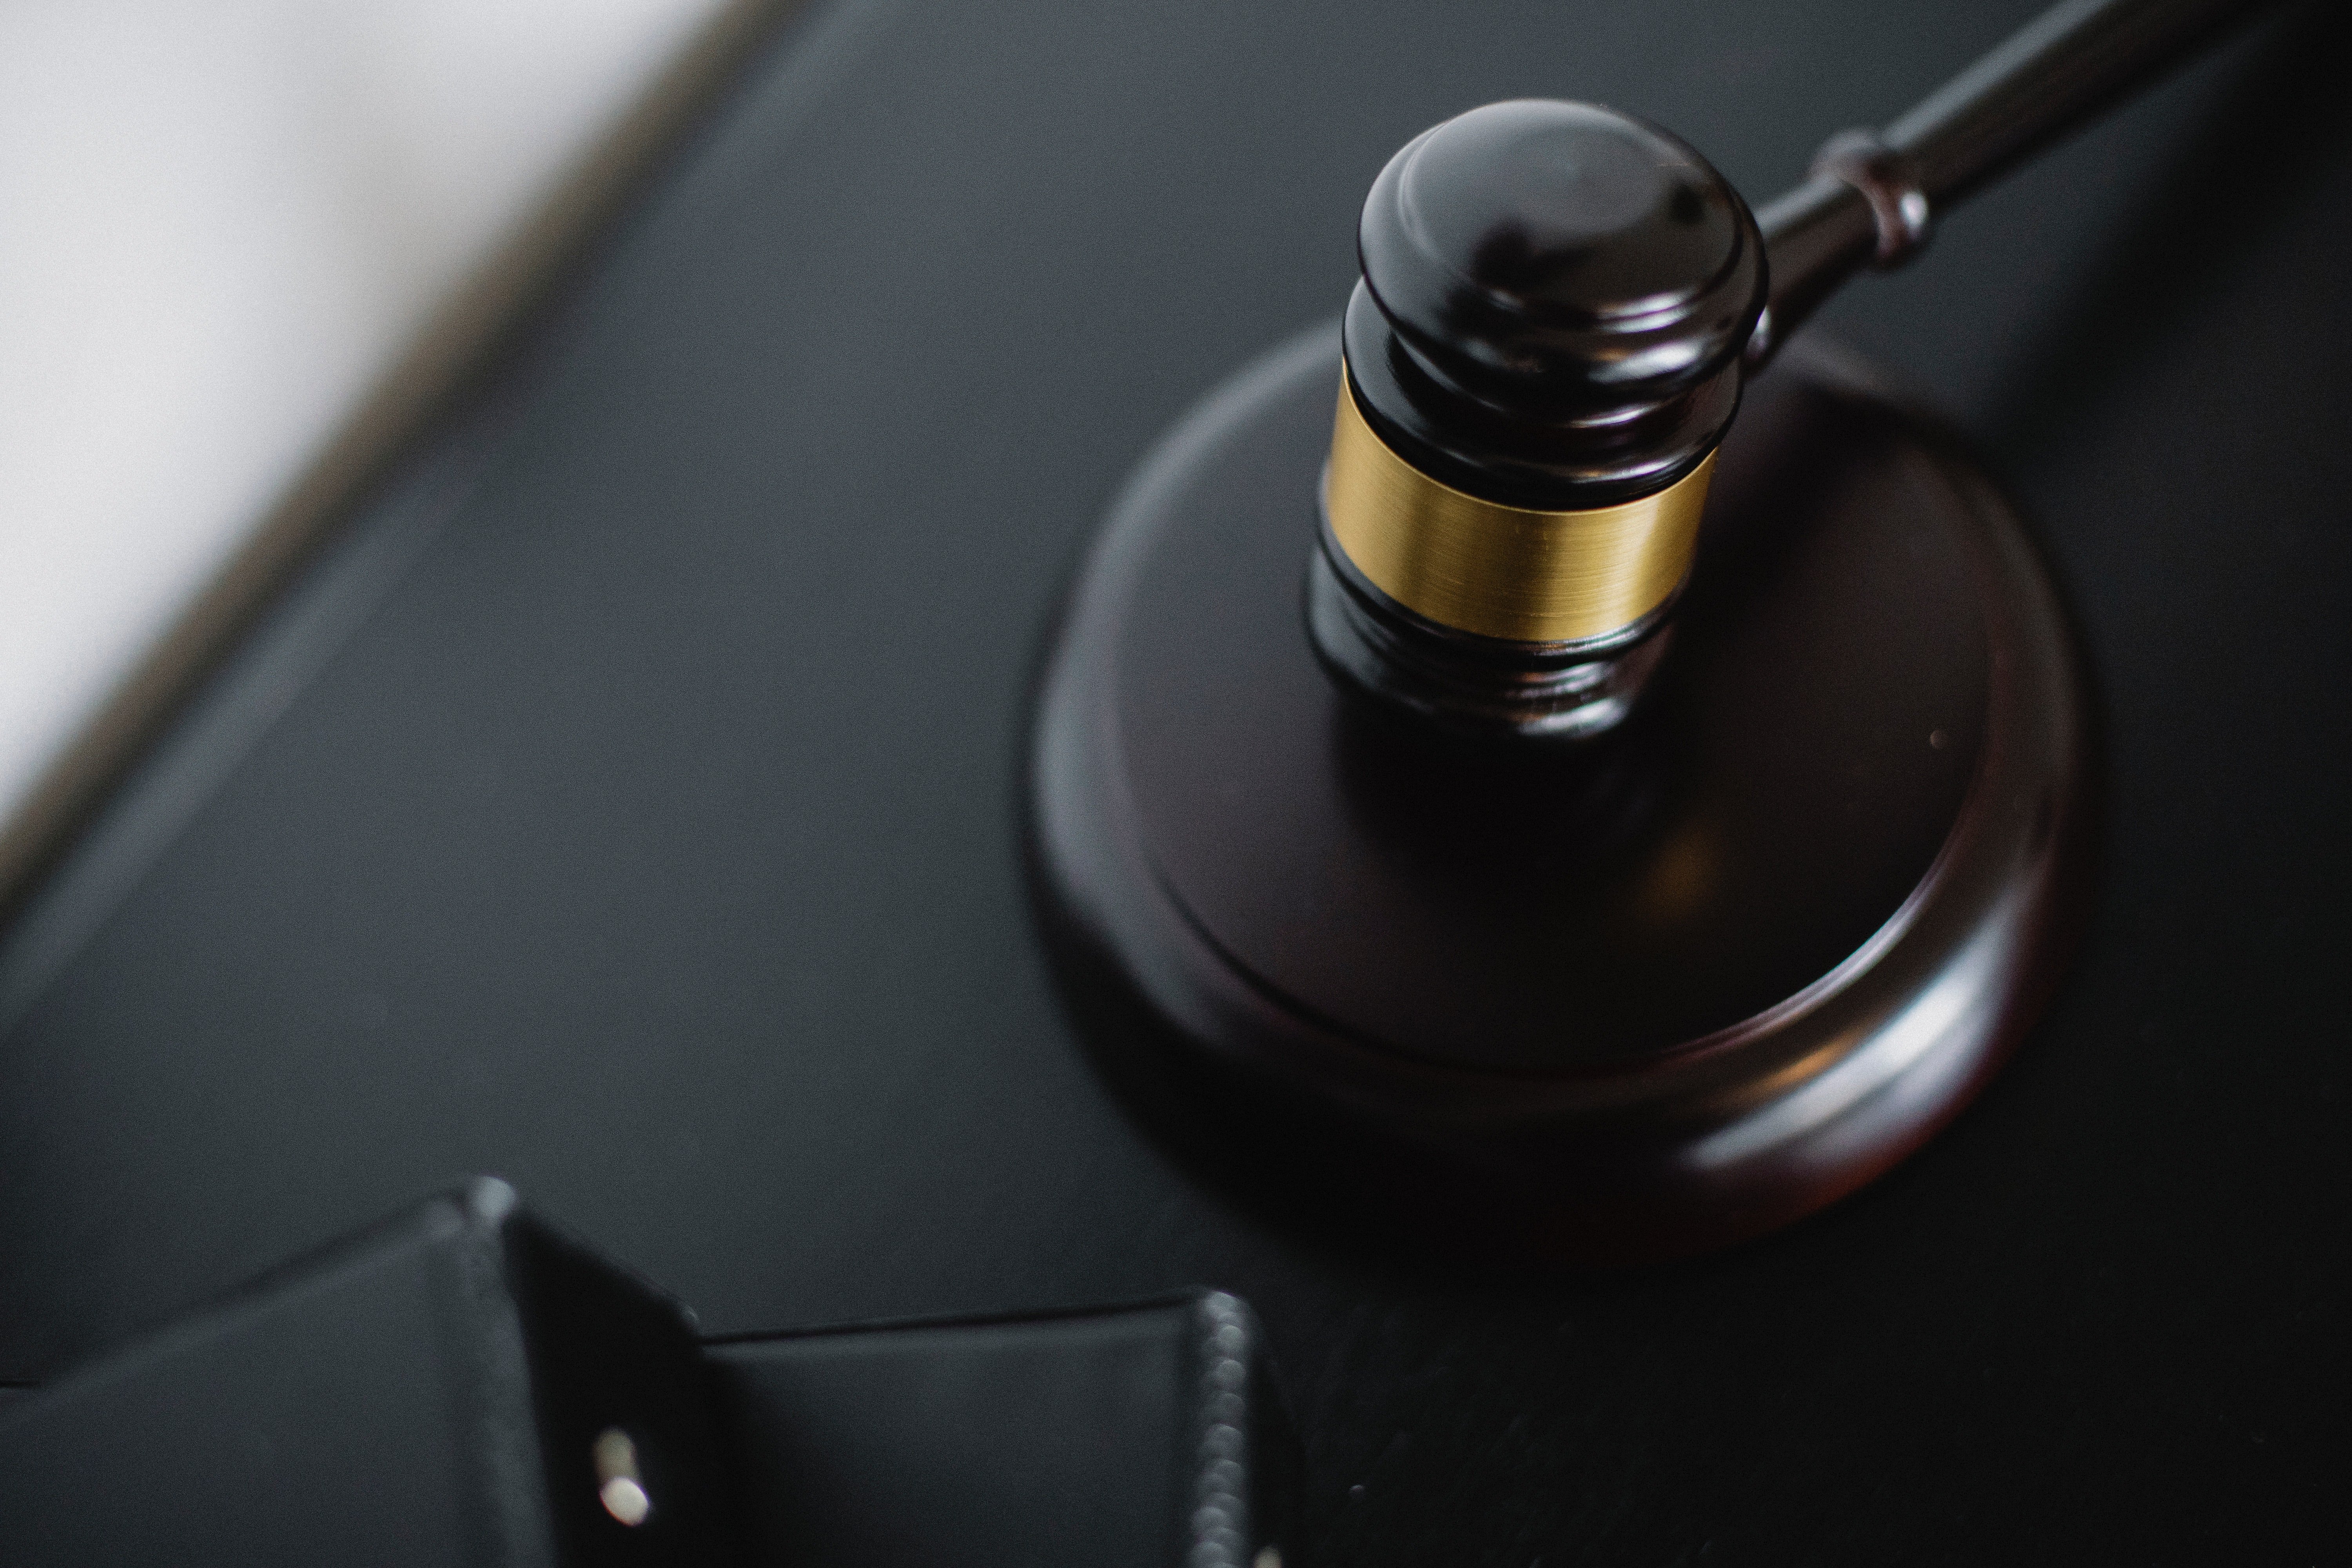 OP threatened to file a lawsuit against her brother | Source: Pexels